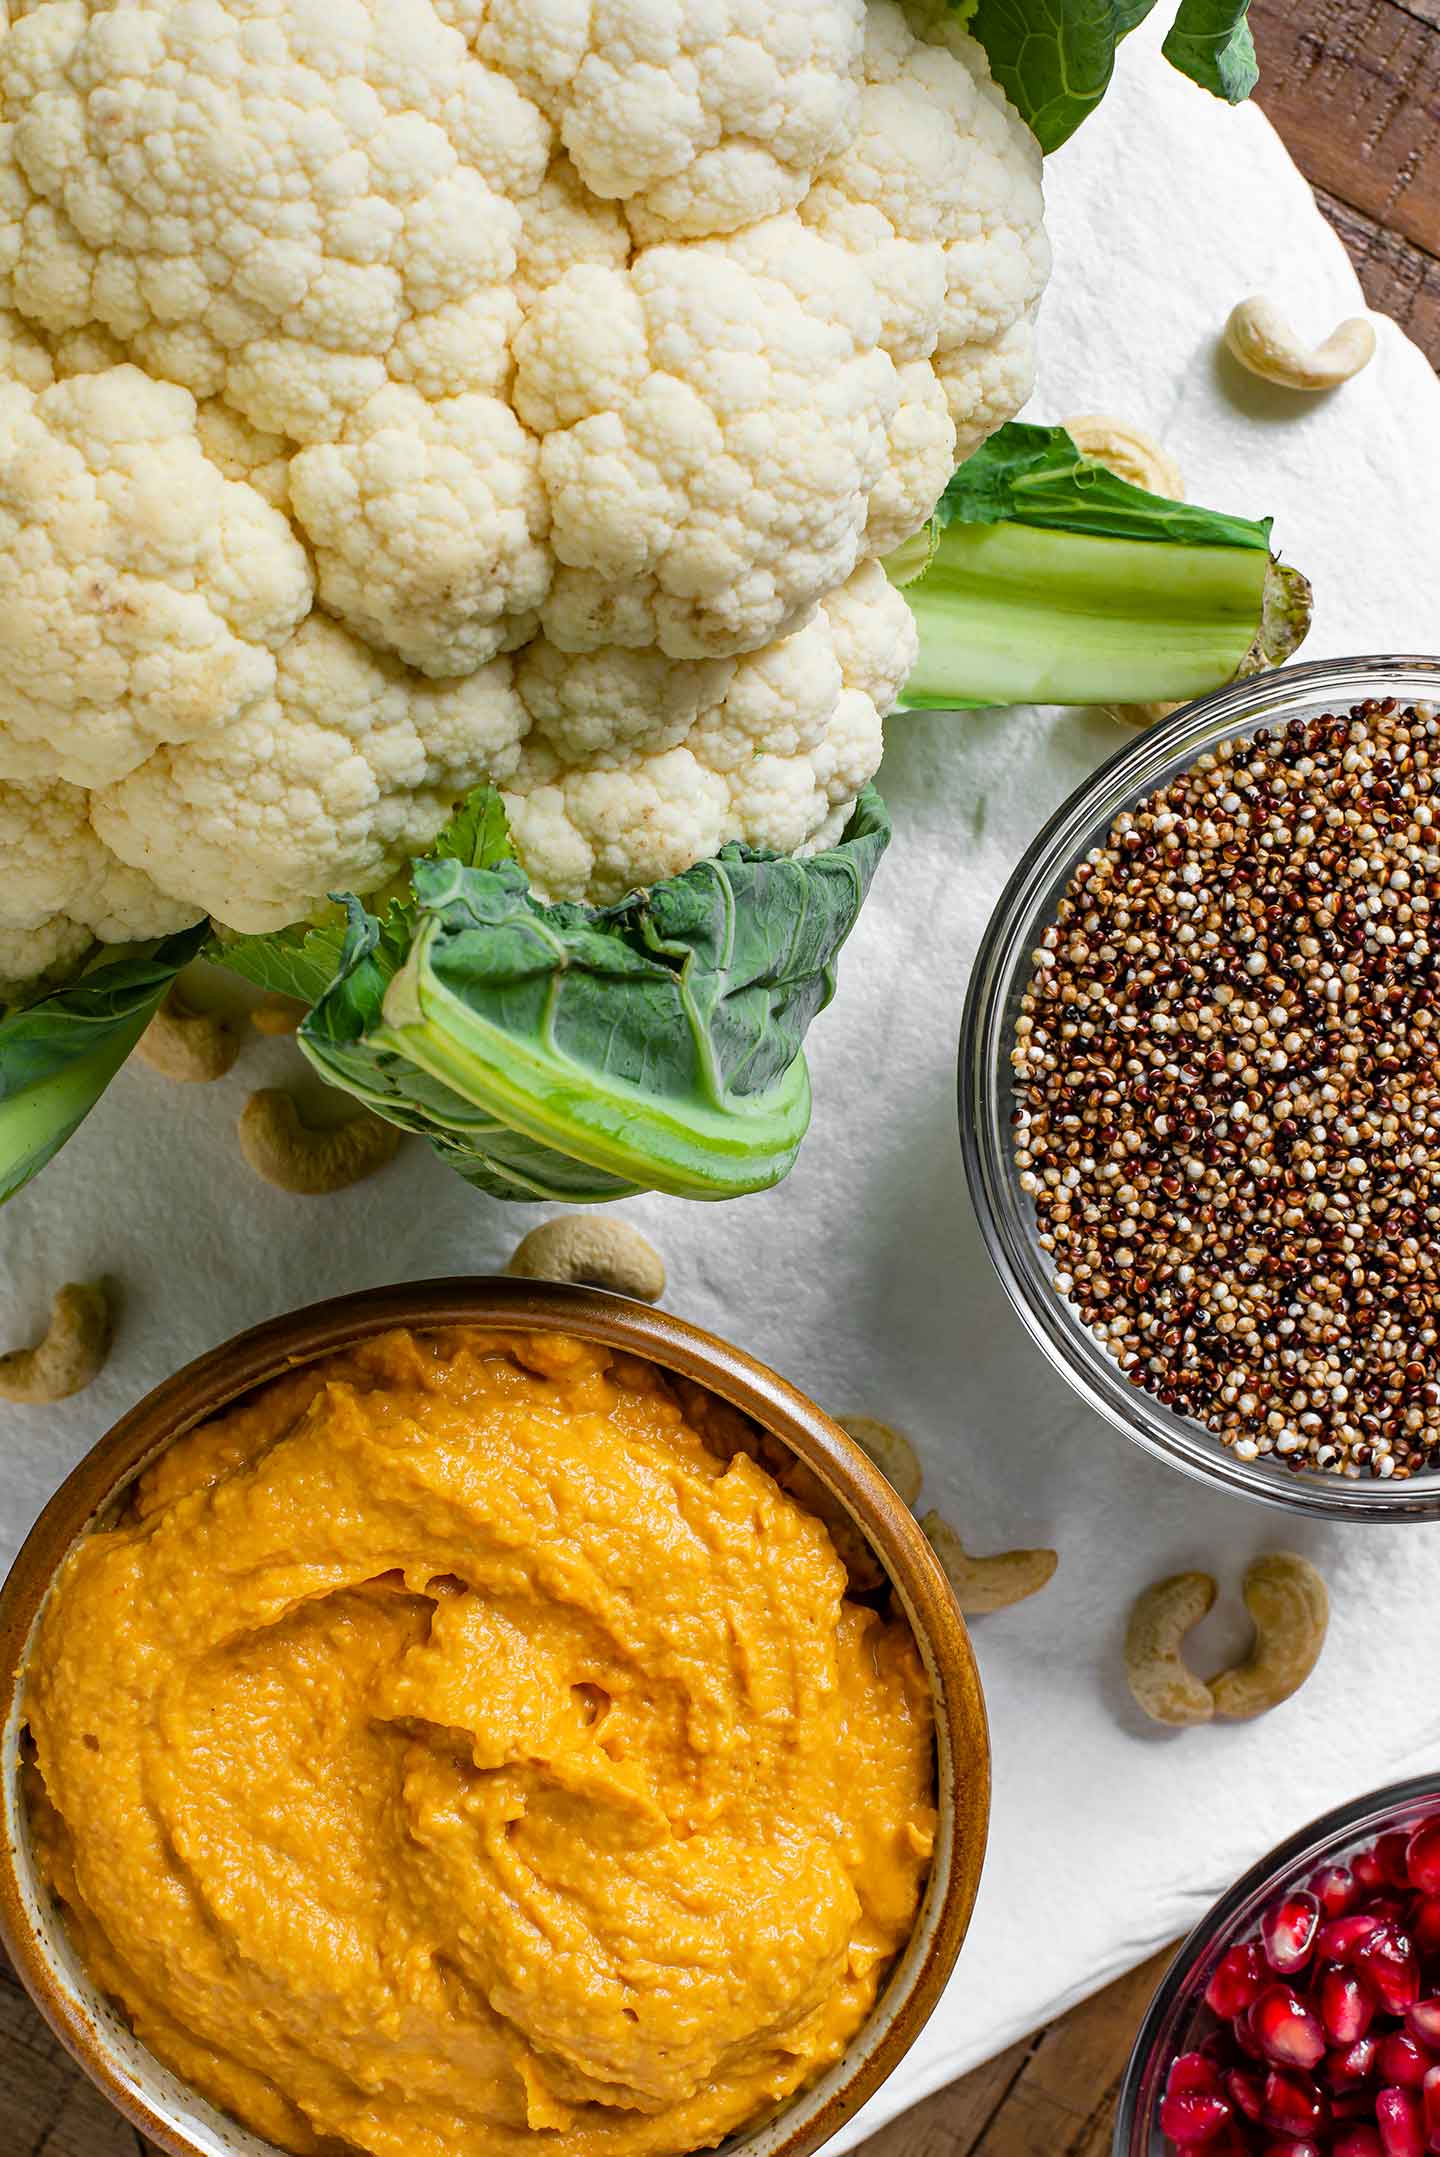 Top down view of a raw cauliflower, a bowl of popped quinoa, and a bowl of pumpkin hummus.